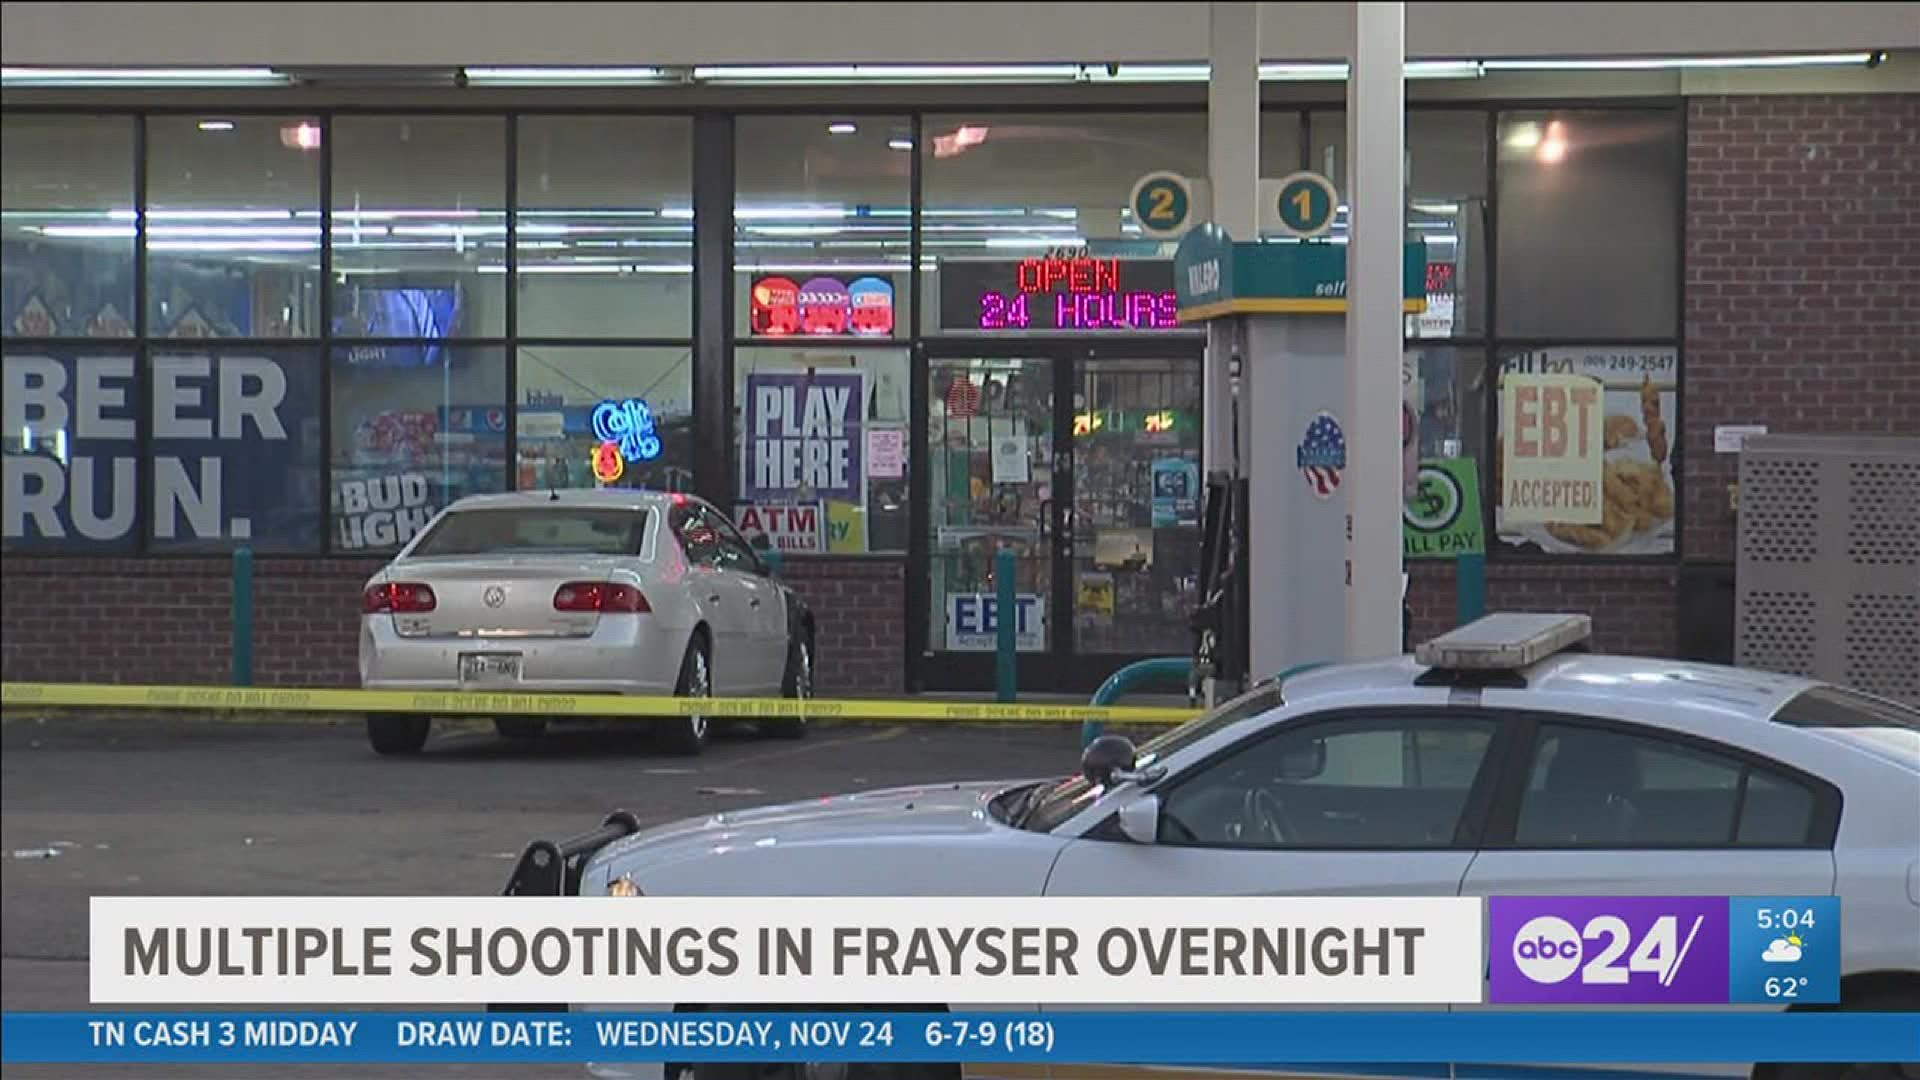 The two shootings happened near a gas station in Frayser within hours of each other.